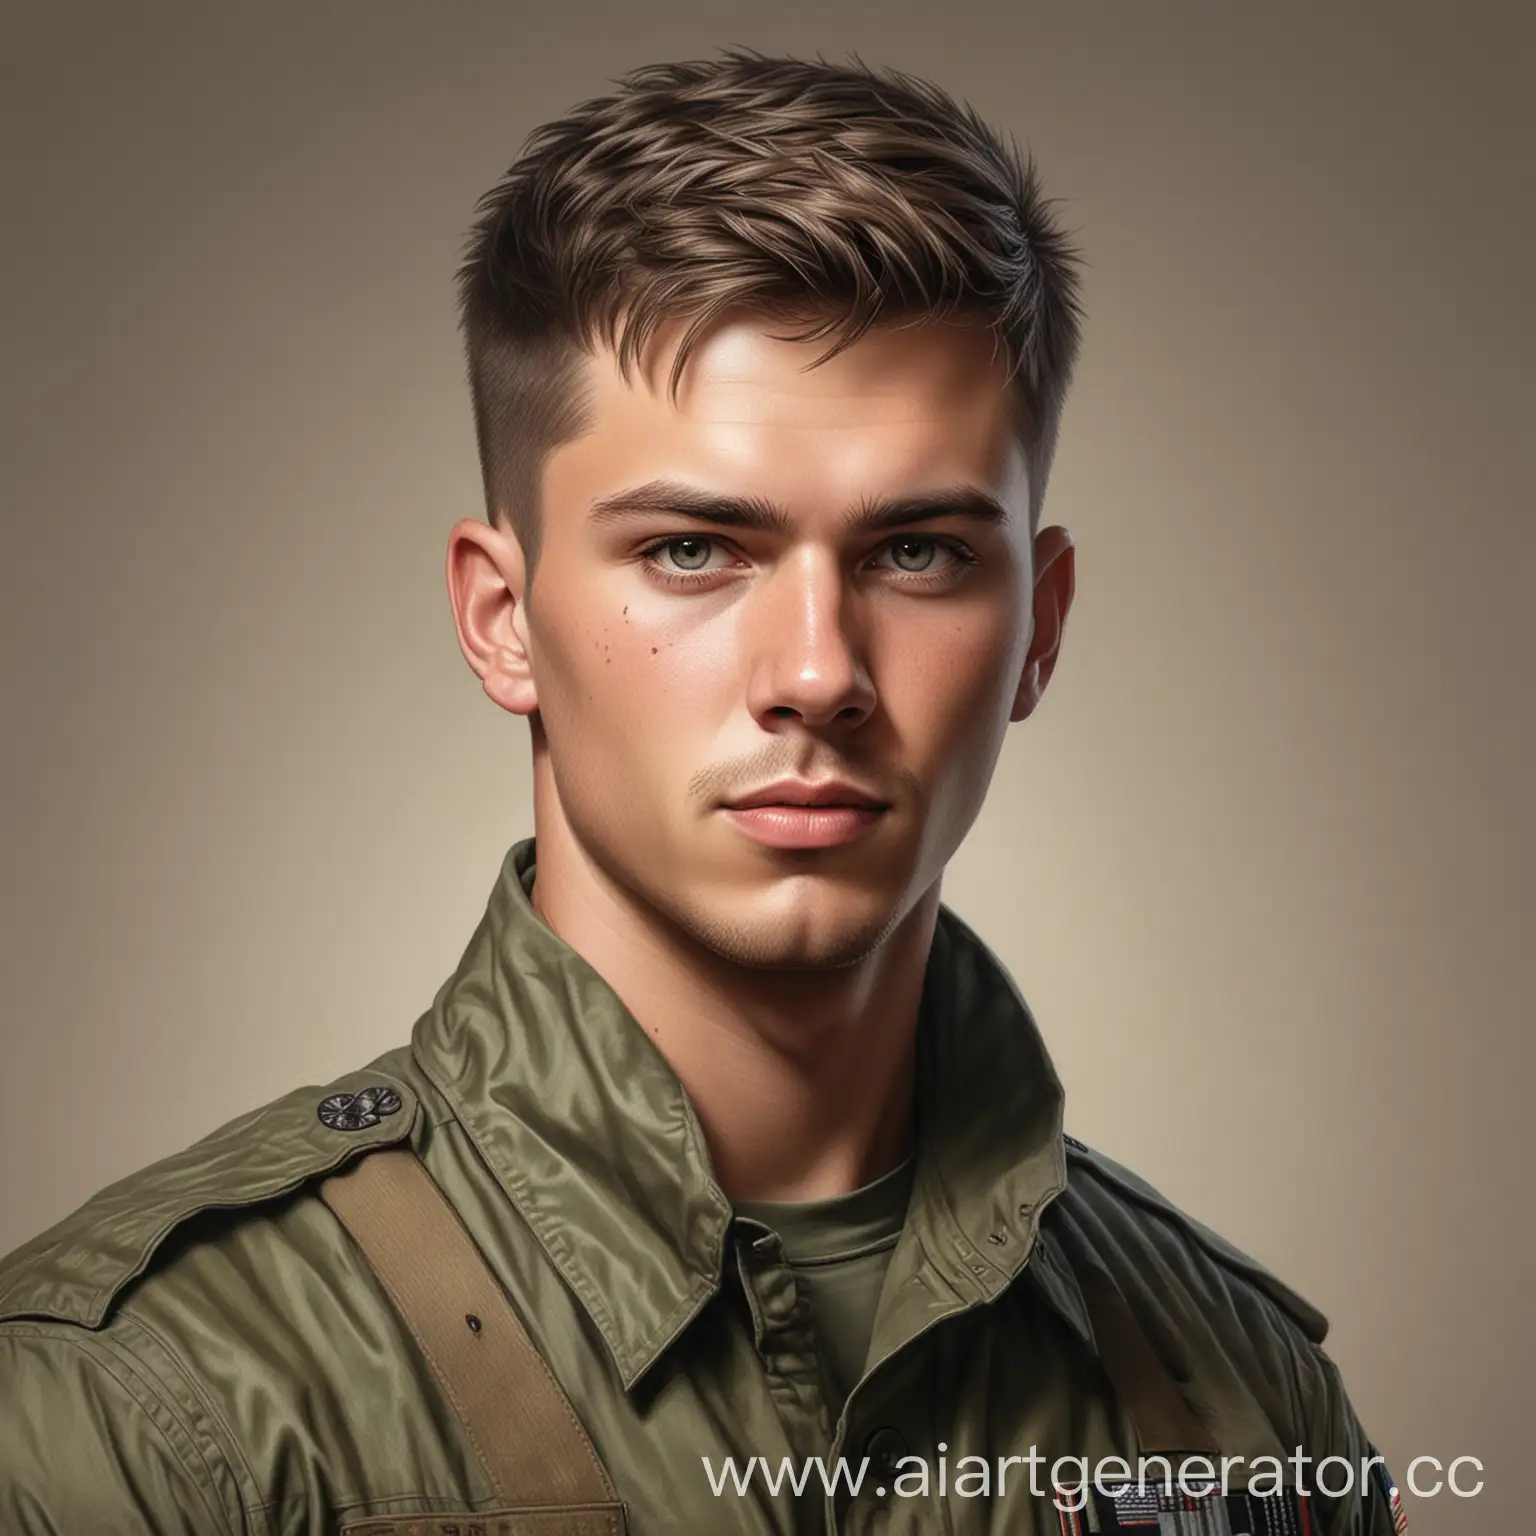 Realistic-Military-Man-with-Short-Haircut-in-Army-Gear